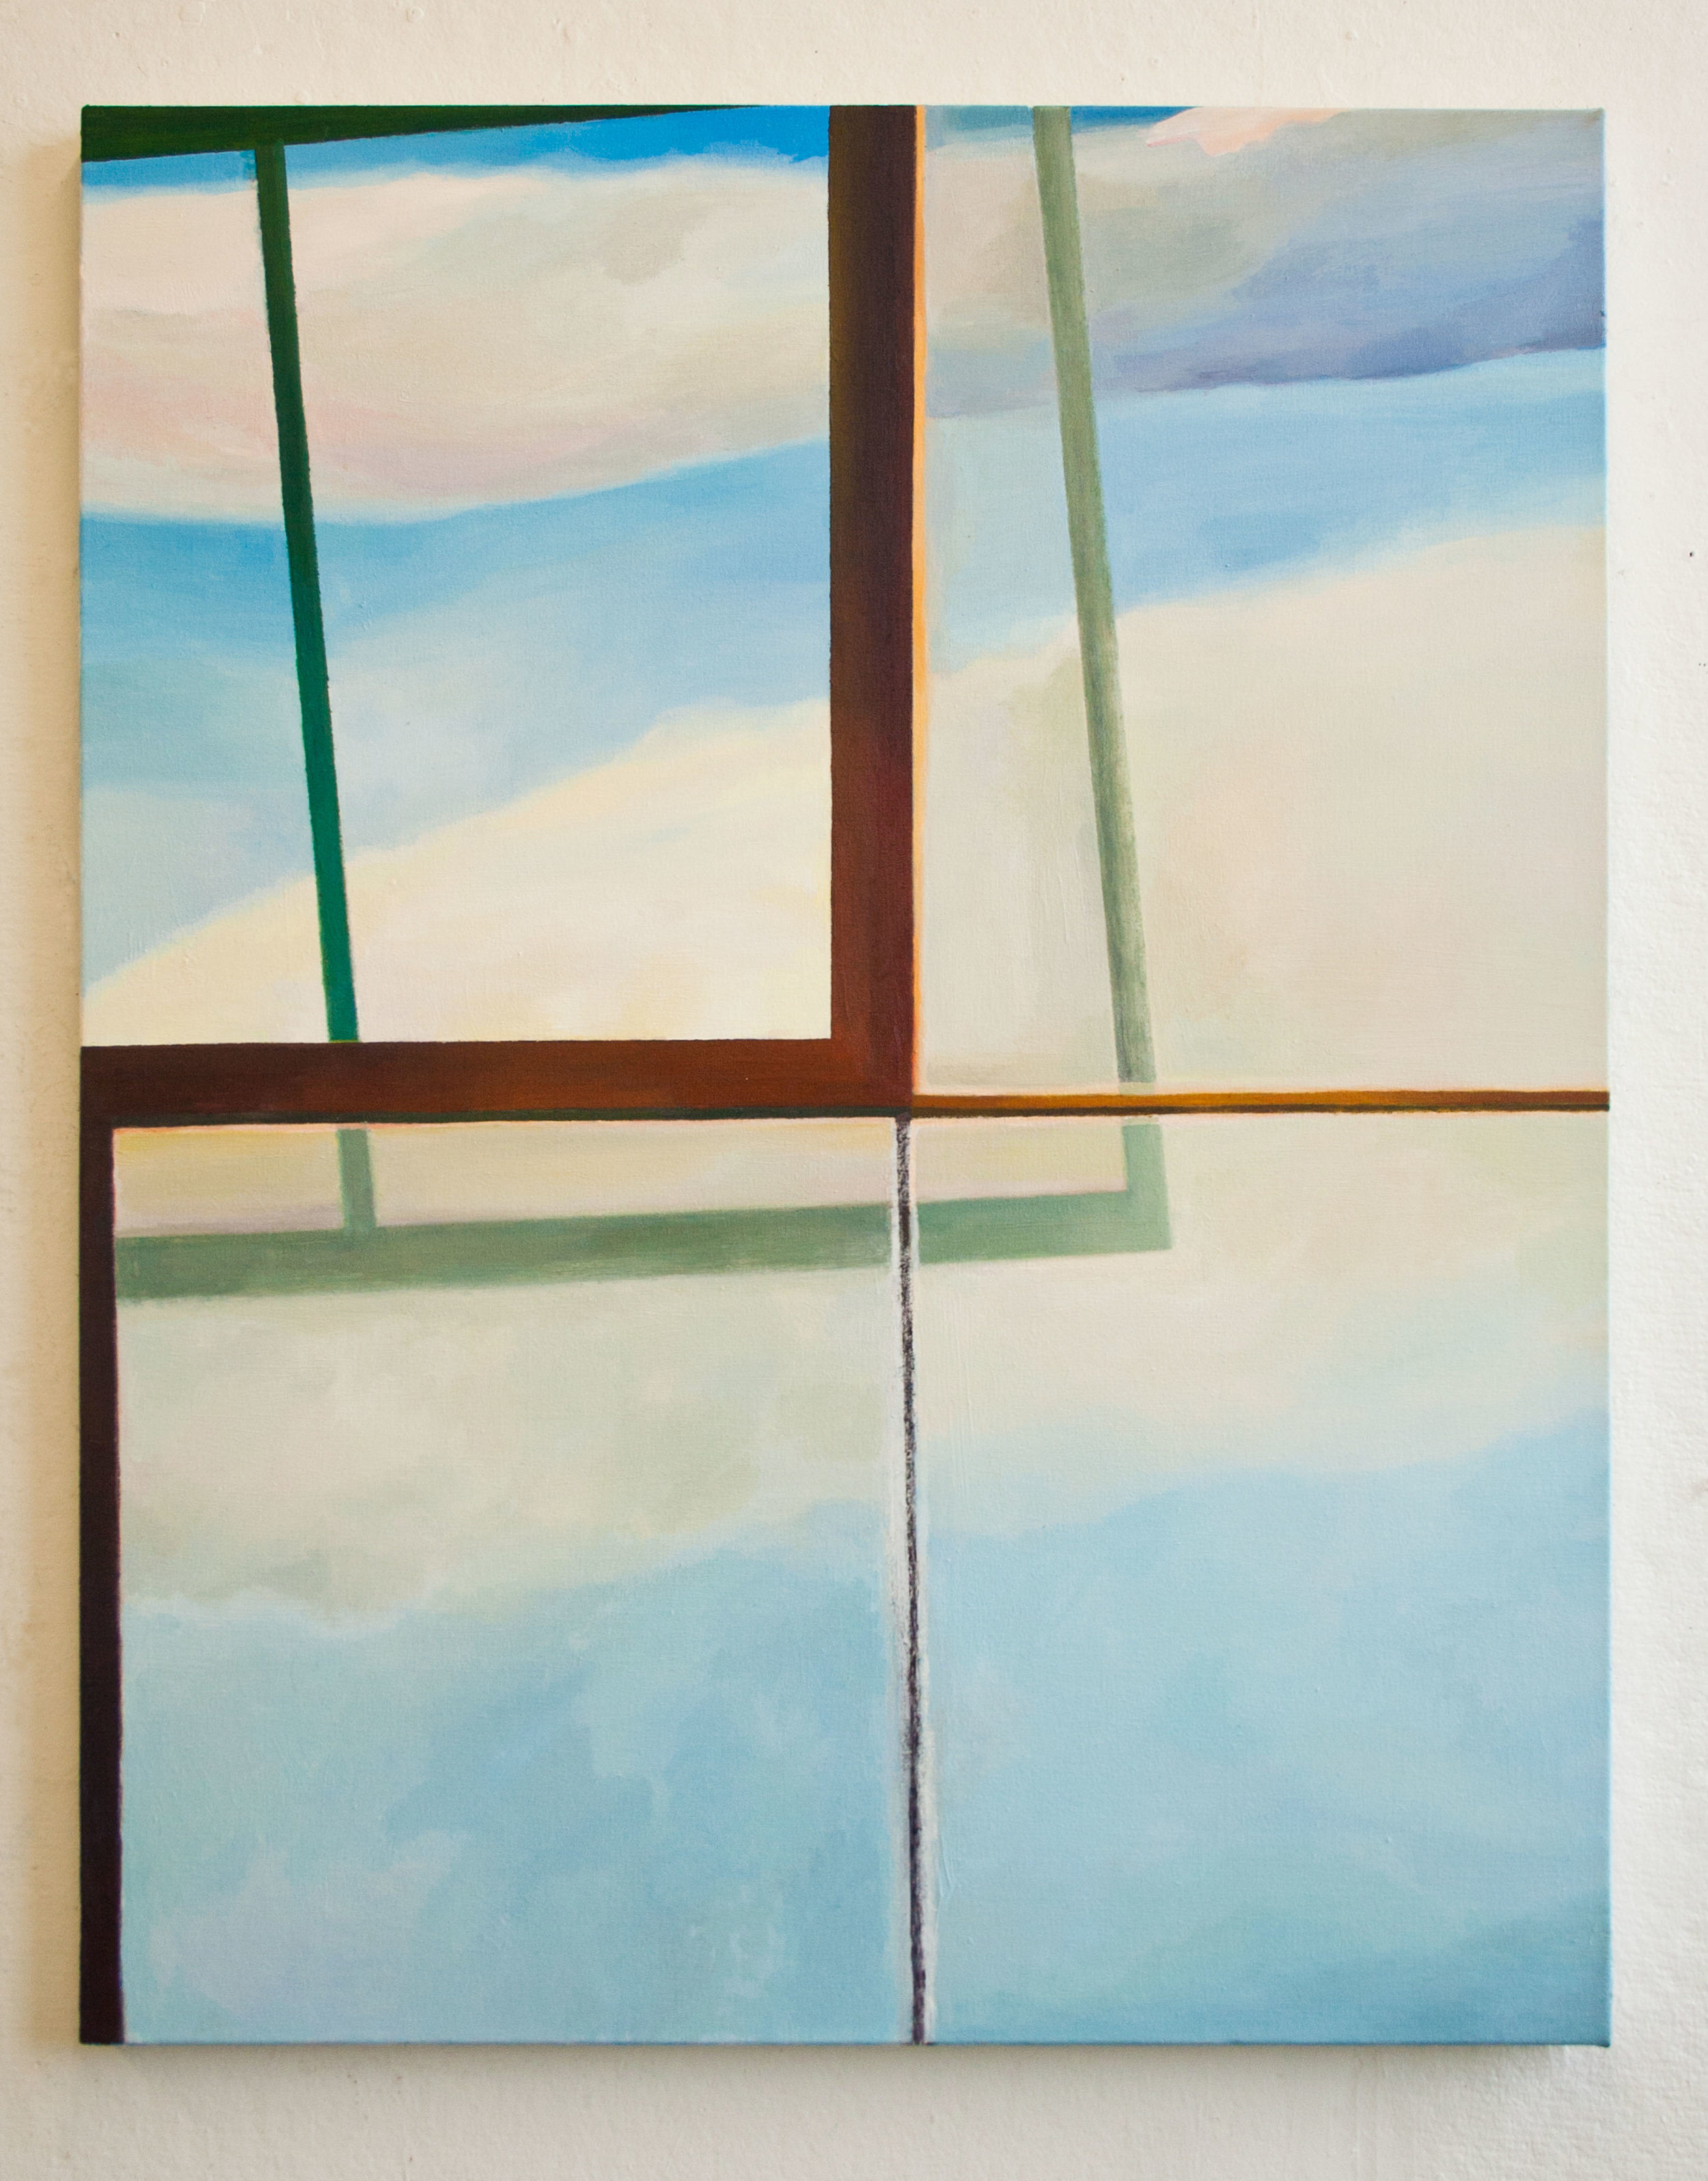 Opened lll, Oil on canvas, 43 x 34 inches, 2015